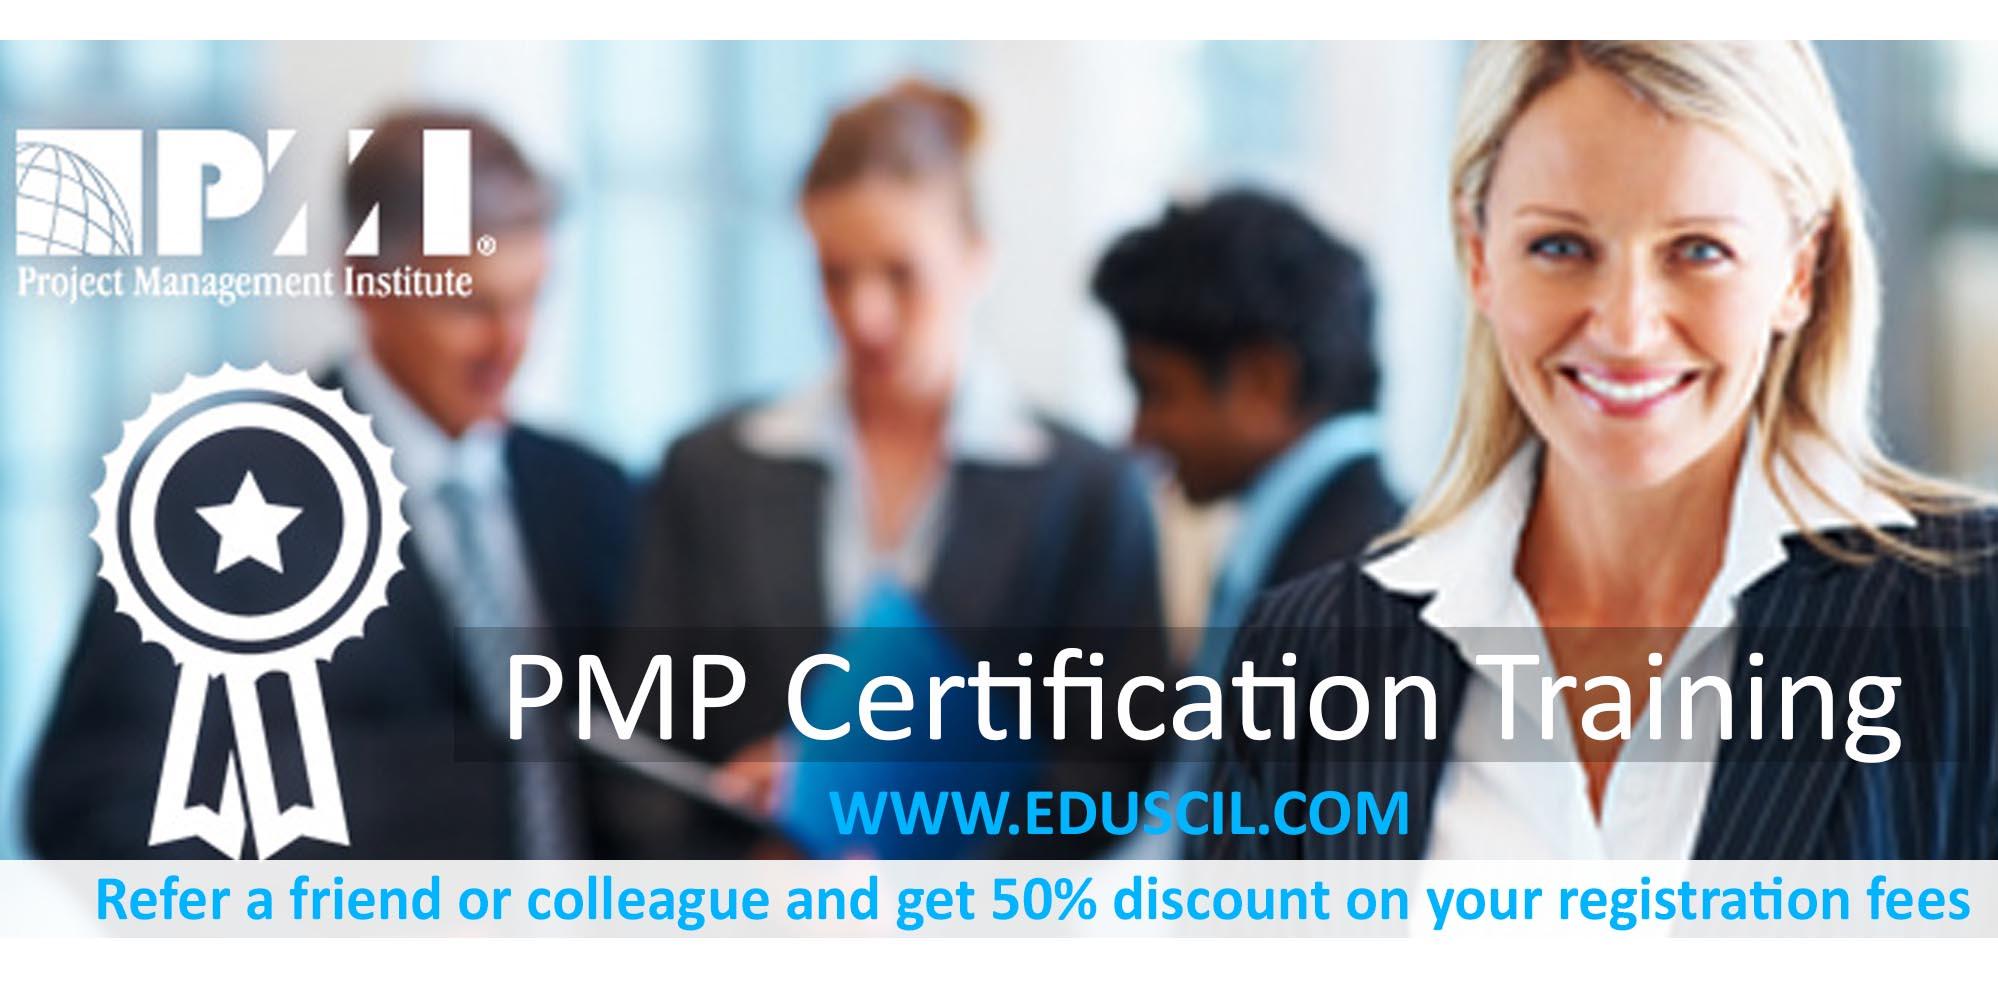 Project Management Professional (PMP) Boot Camp in Rochester, NY-USA|Eduscil